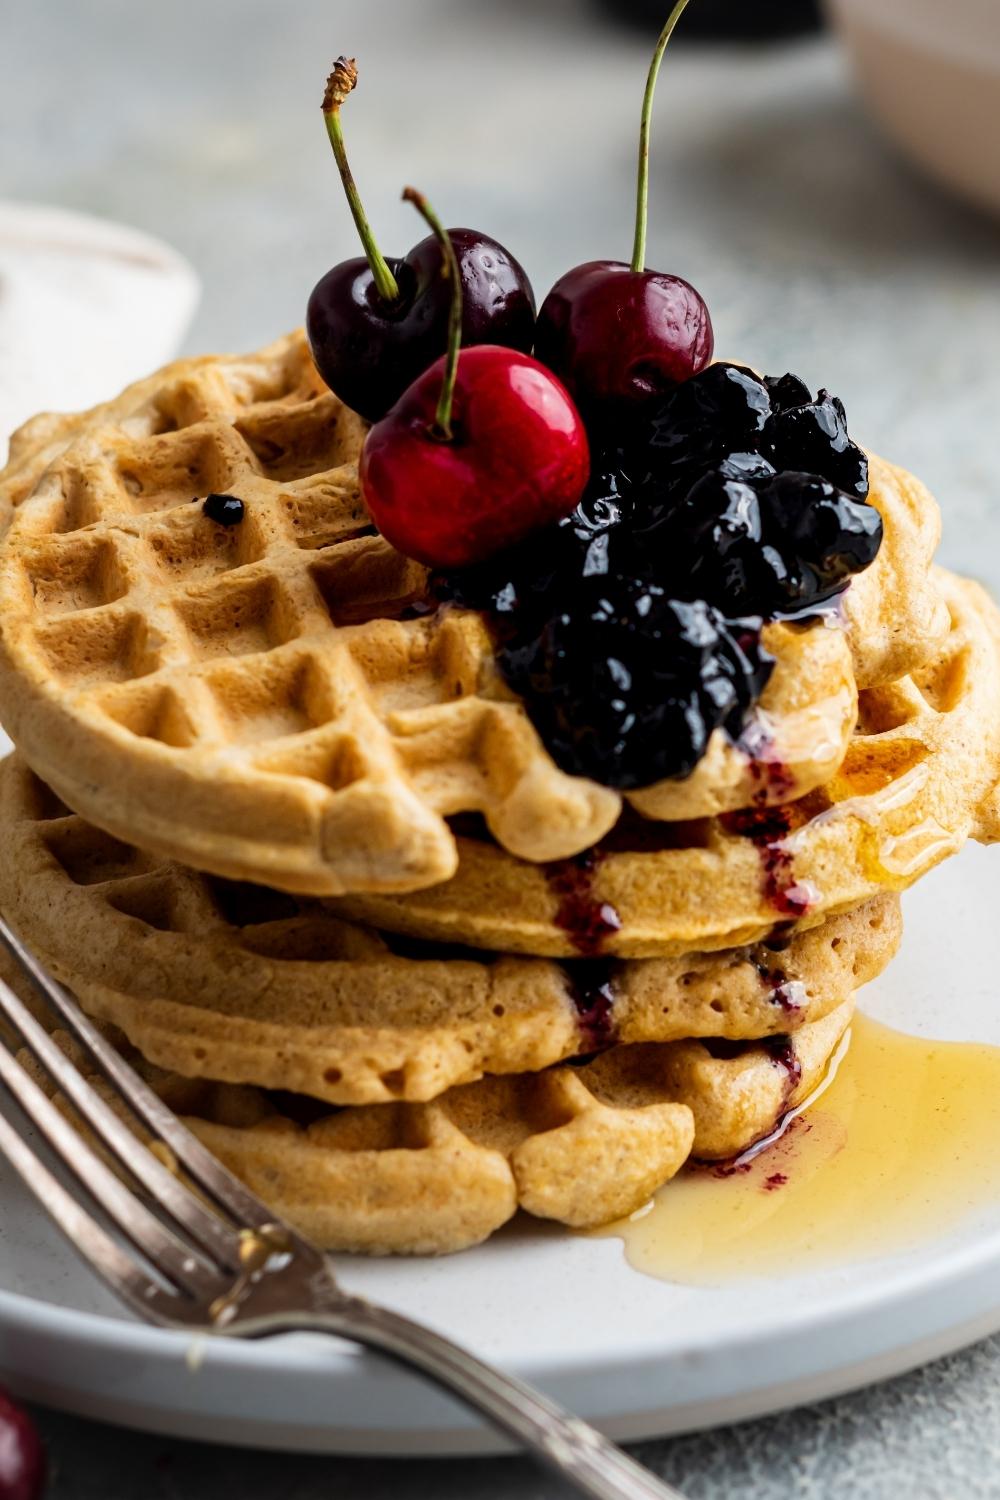 A stack of four homemade waffles without milk, drizzled with honey and topped with fresh berries and cherries.